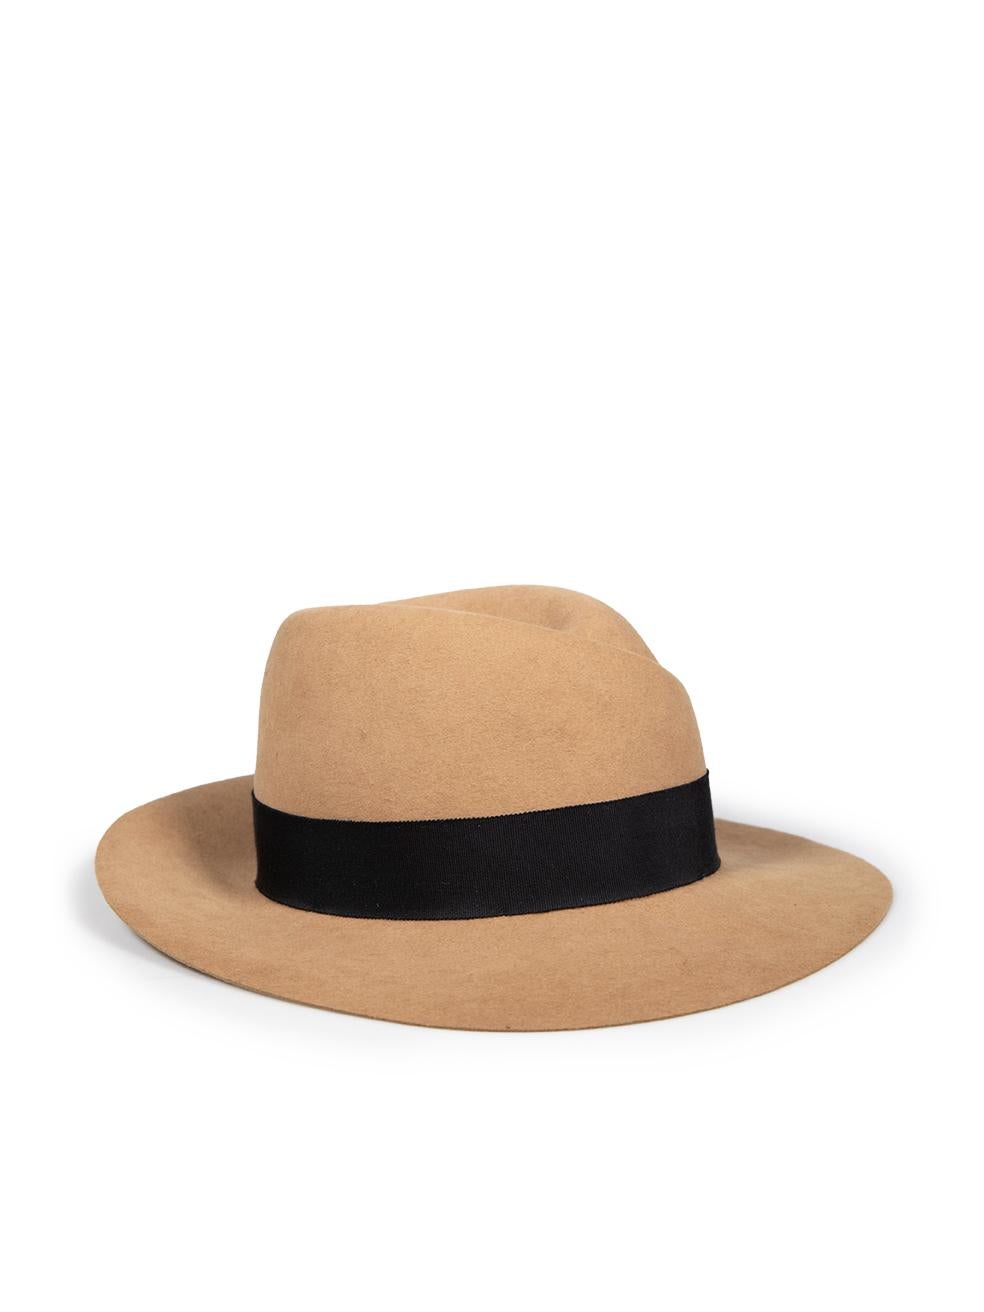 CONDITION is Good. Minor wear to hat is evident. Light wear is seen with some pilling internally and a mark on the backside of this used Maison Michel designer resale item.
 
 
 
 Details
 
 
 Camel
 
 Wool
 
 Fedora hat
 
 Felted
 
 Black band